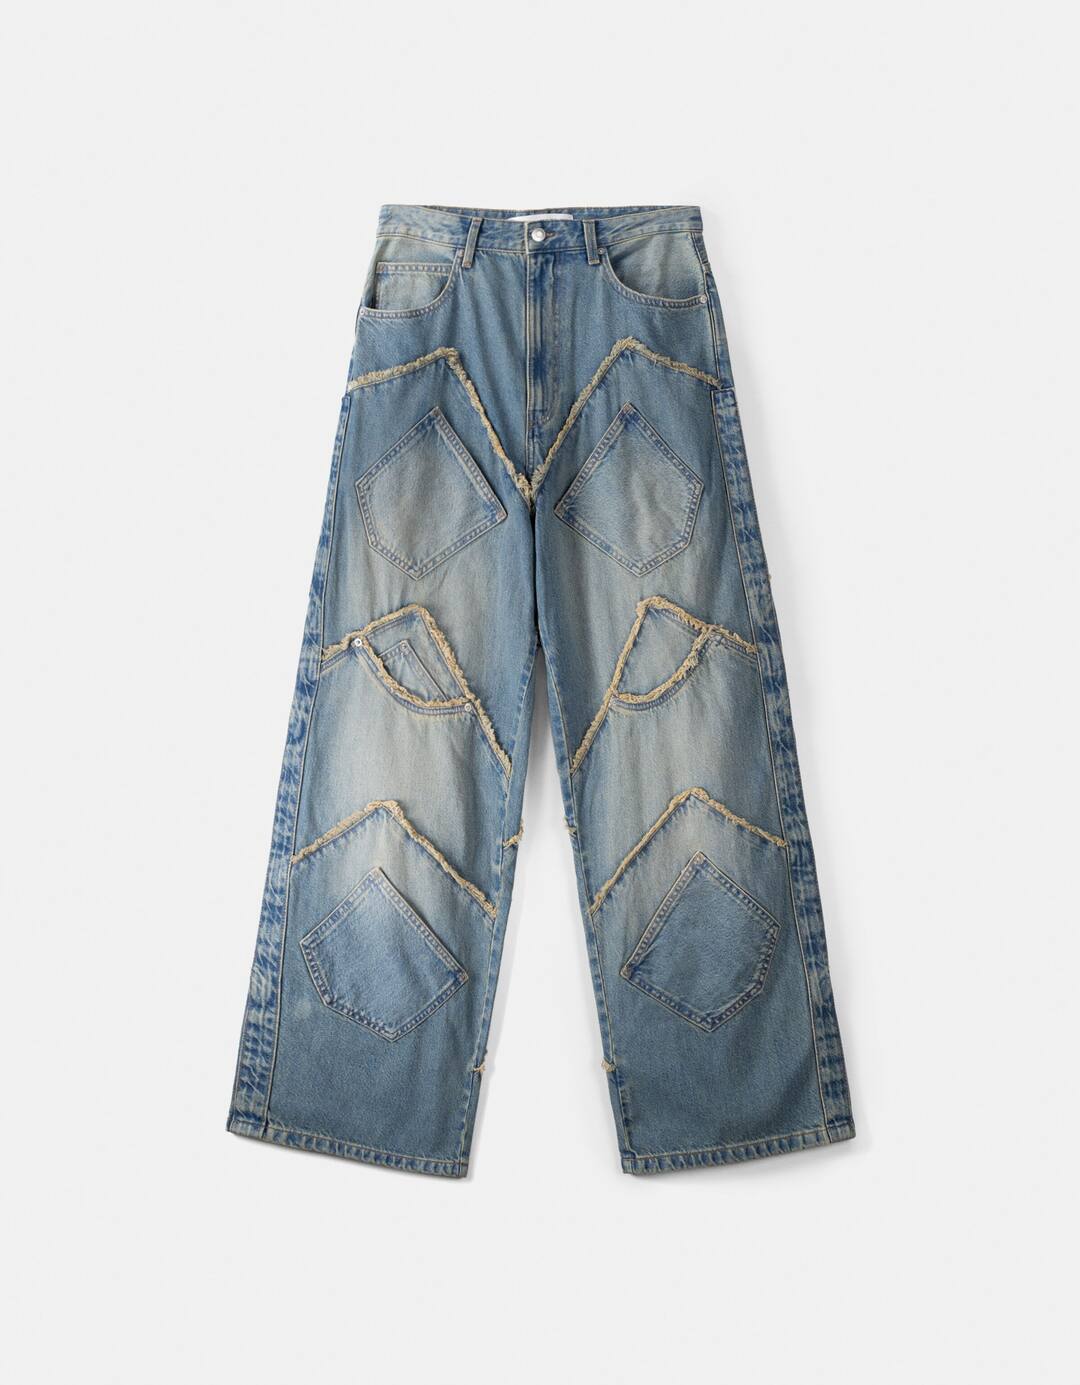 Super baggy jeans with patches